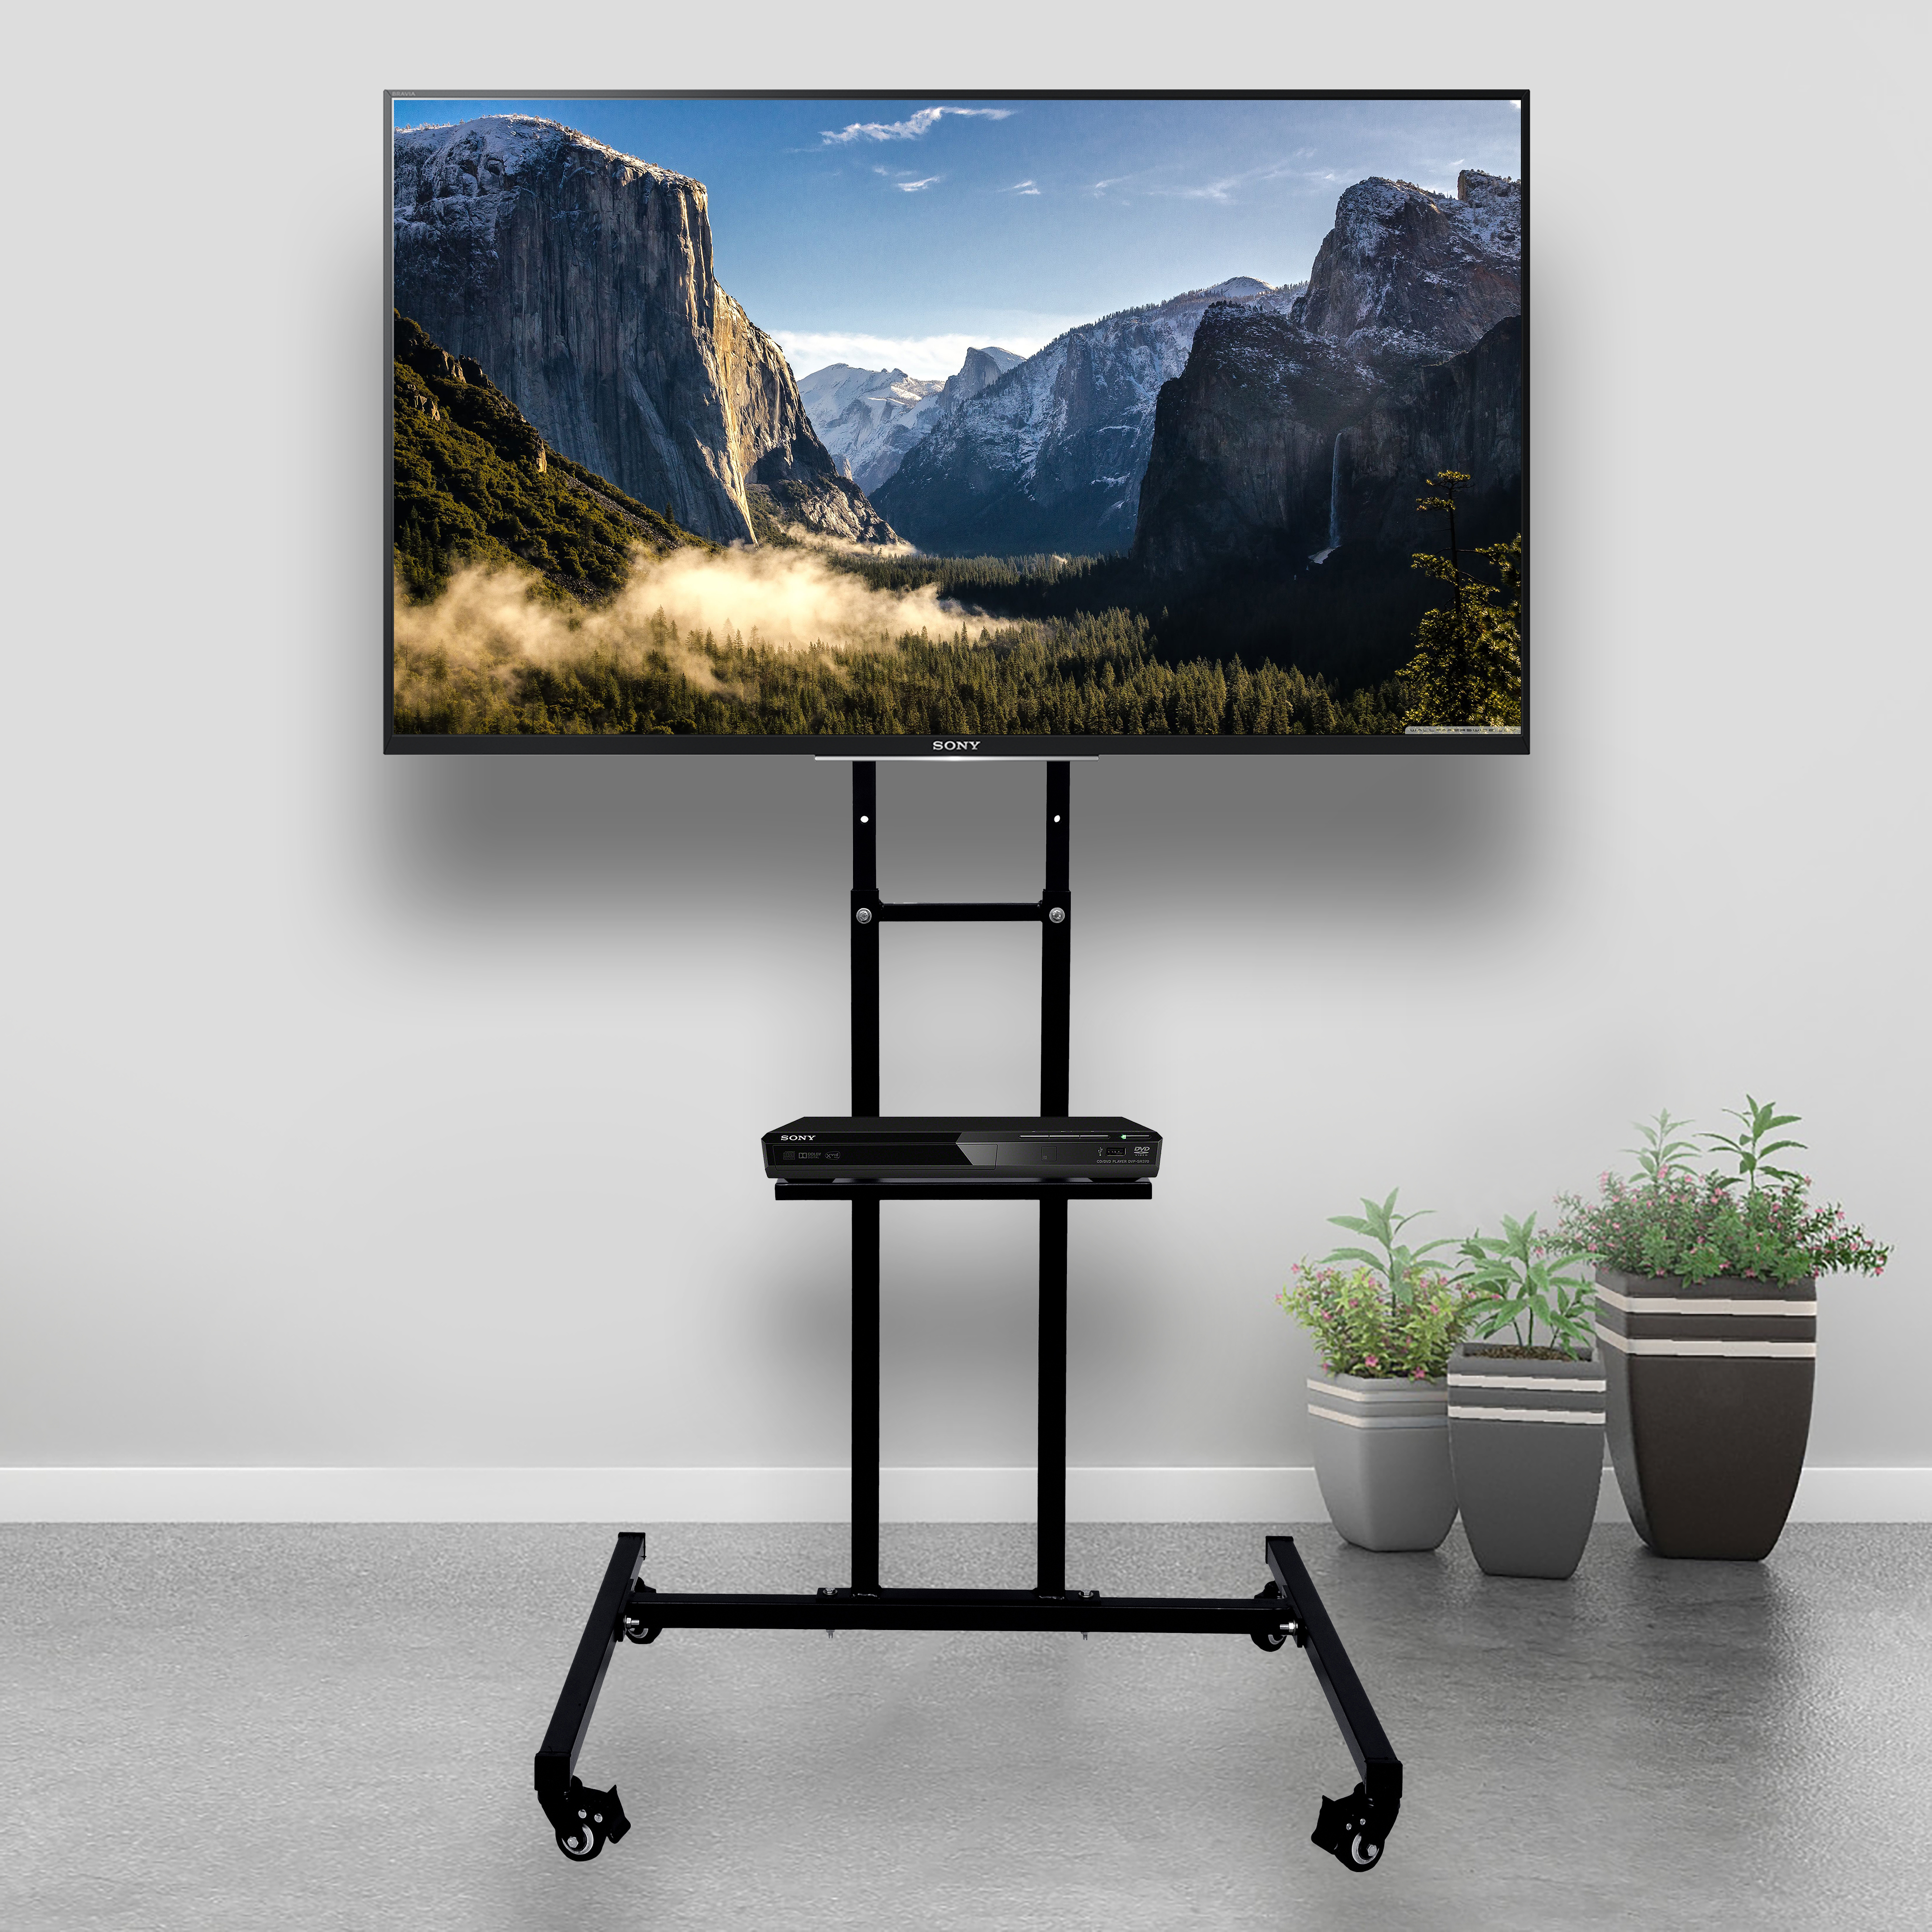 D&V ENGINEERING Metal Mobile TV Stand on Wheels for 32-55 Inch Flat/Curved Panel Screens TVs - Height Adjustable Floor Trolley Stand Holds up to 58 Kg, (Design 1)